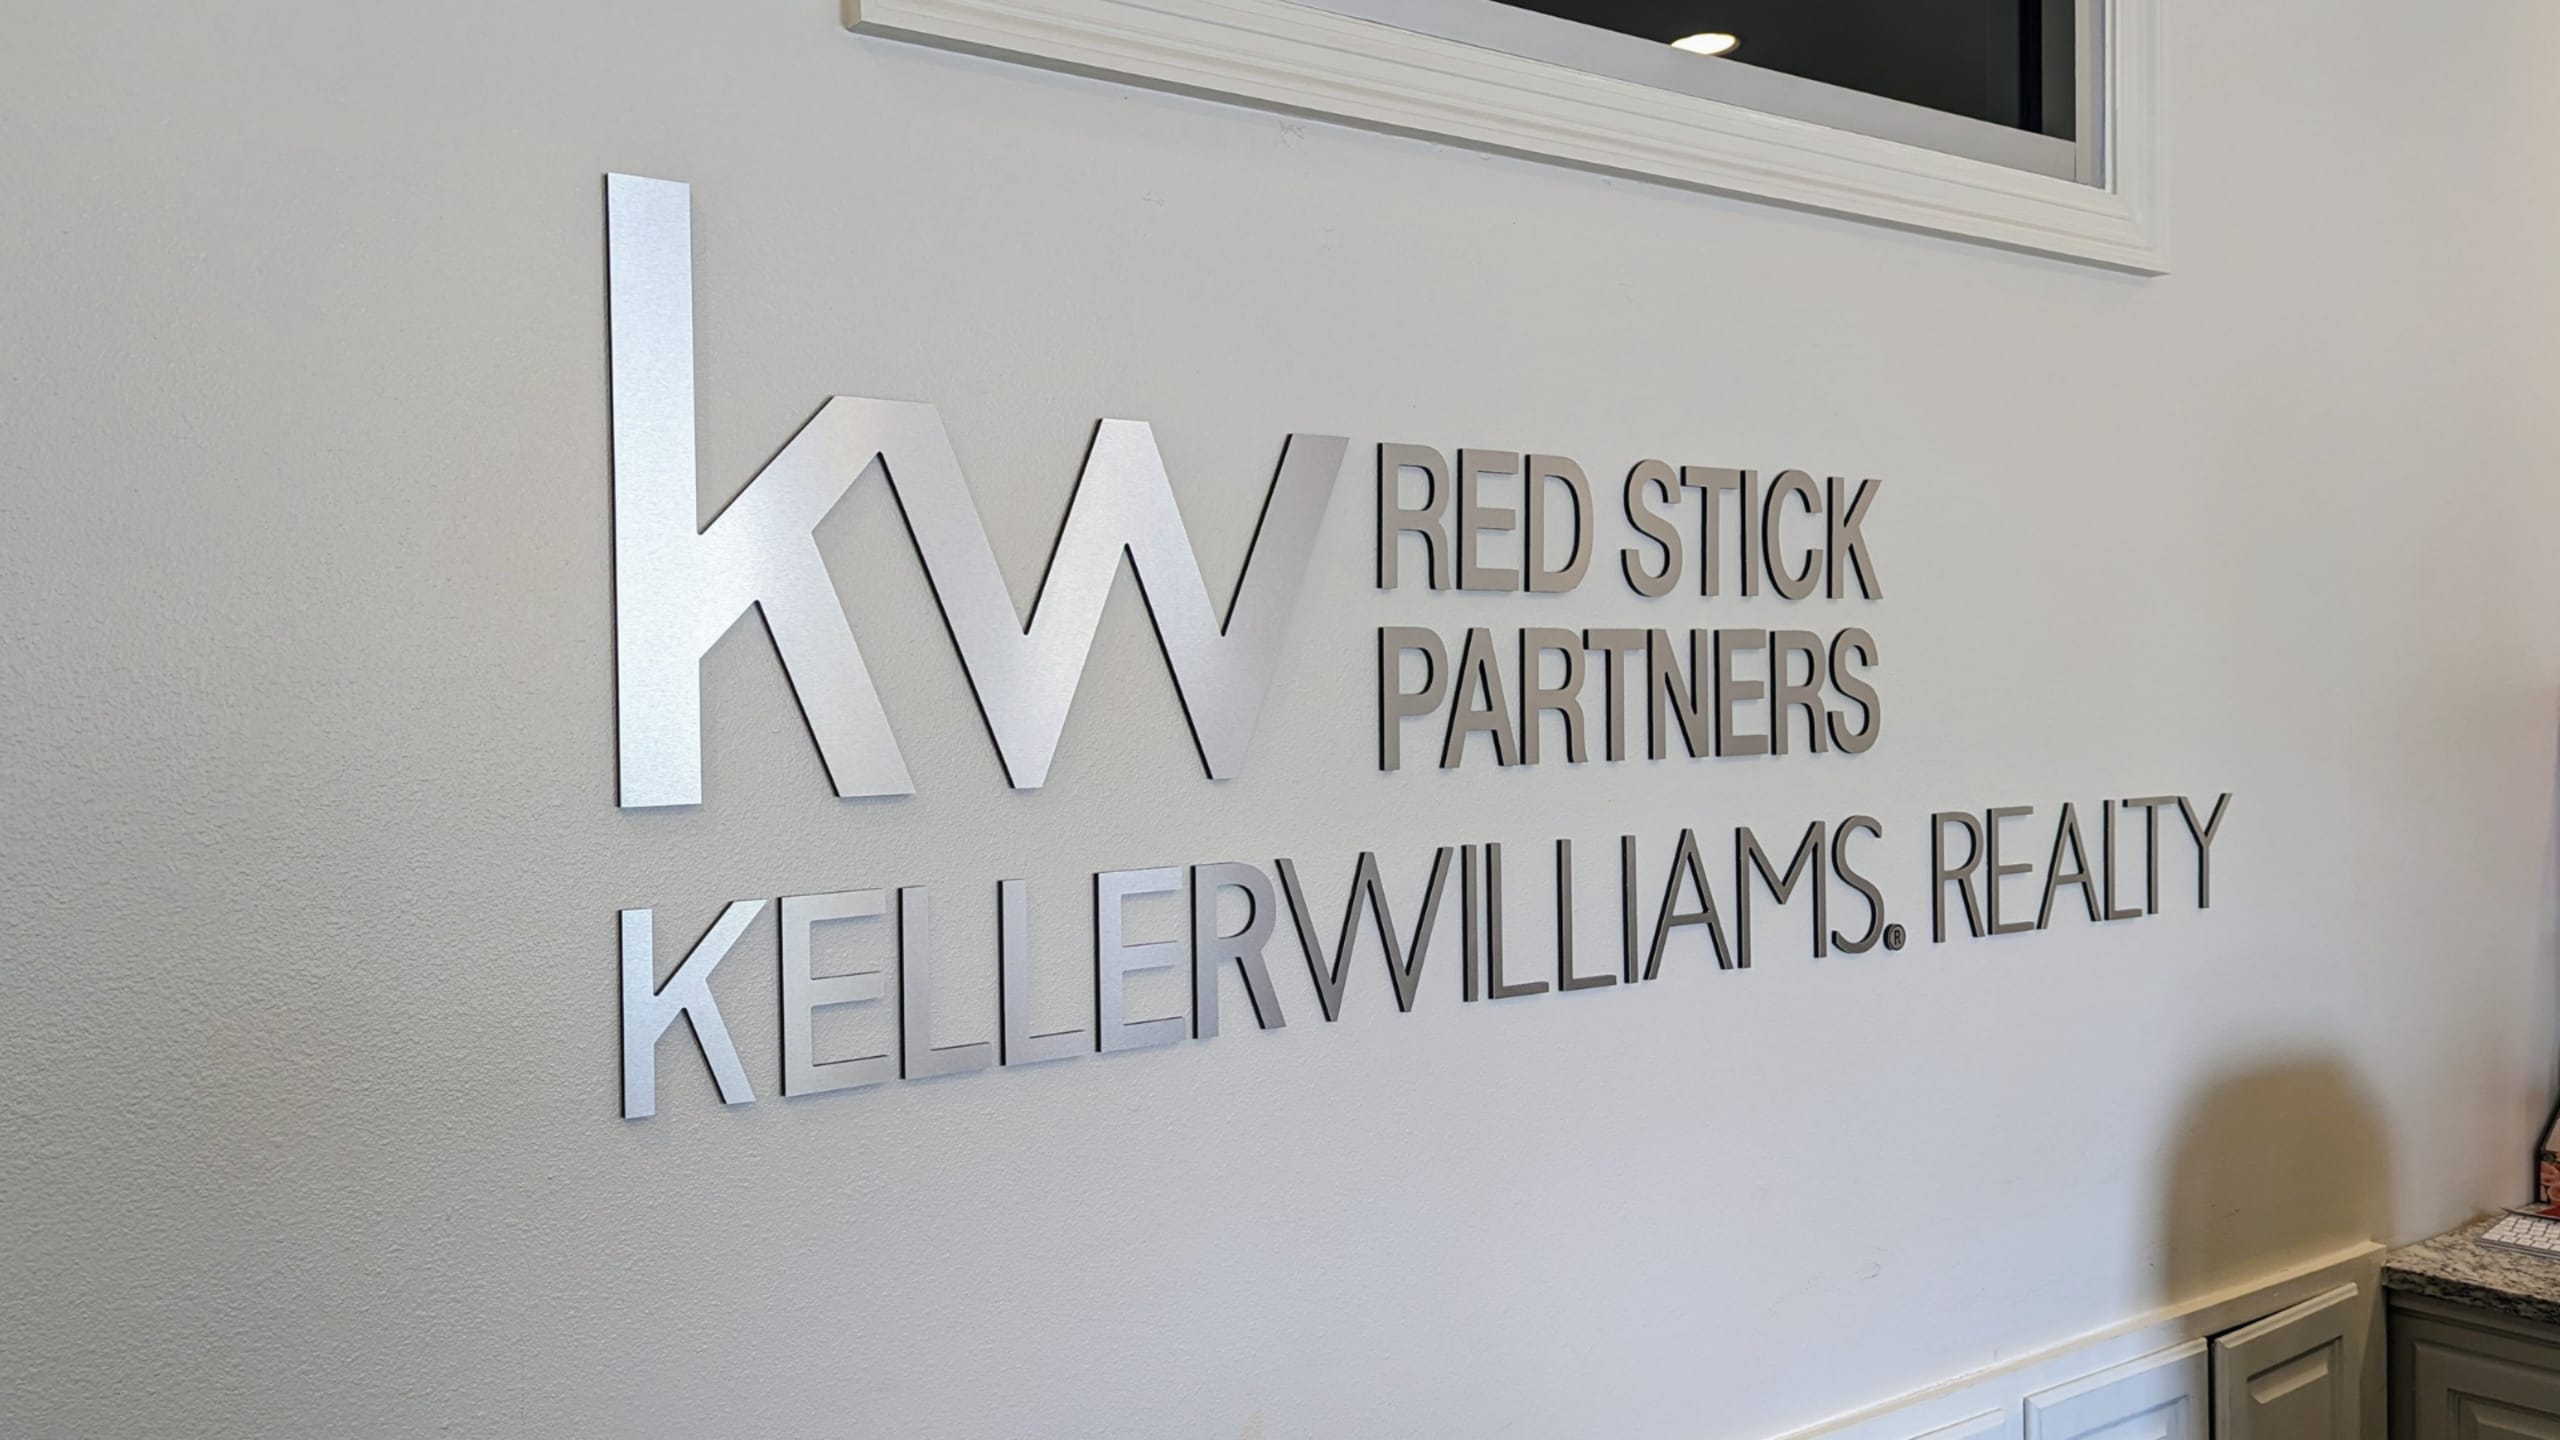 Keller Williams Realty Red Stick Partners - The #1 Brokerage in the Greater  Baton Area